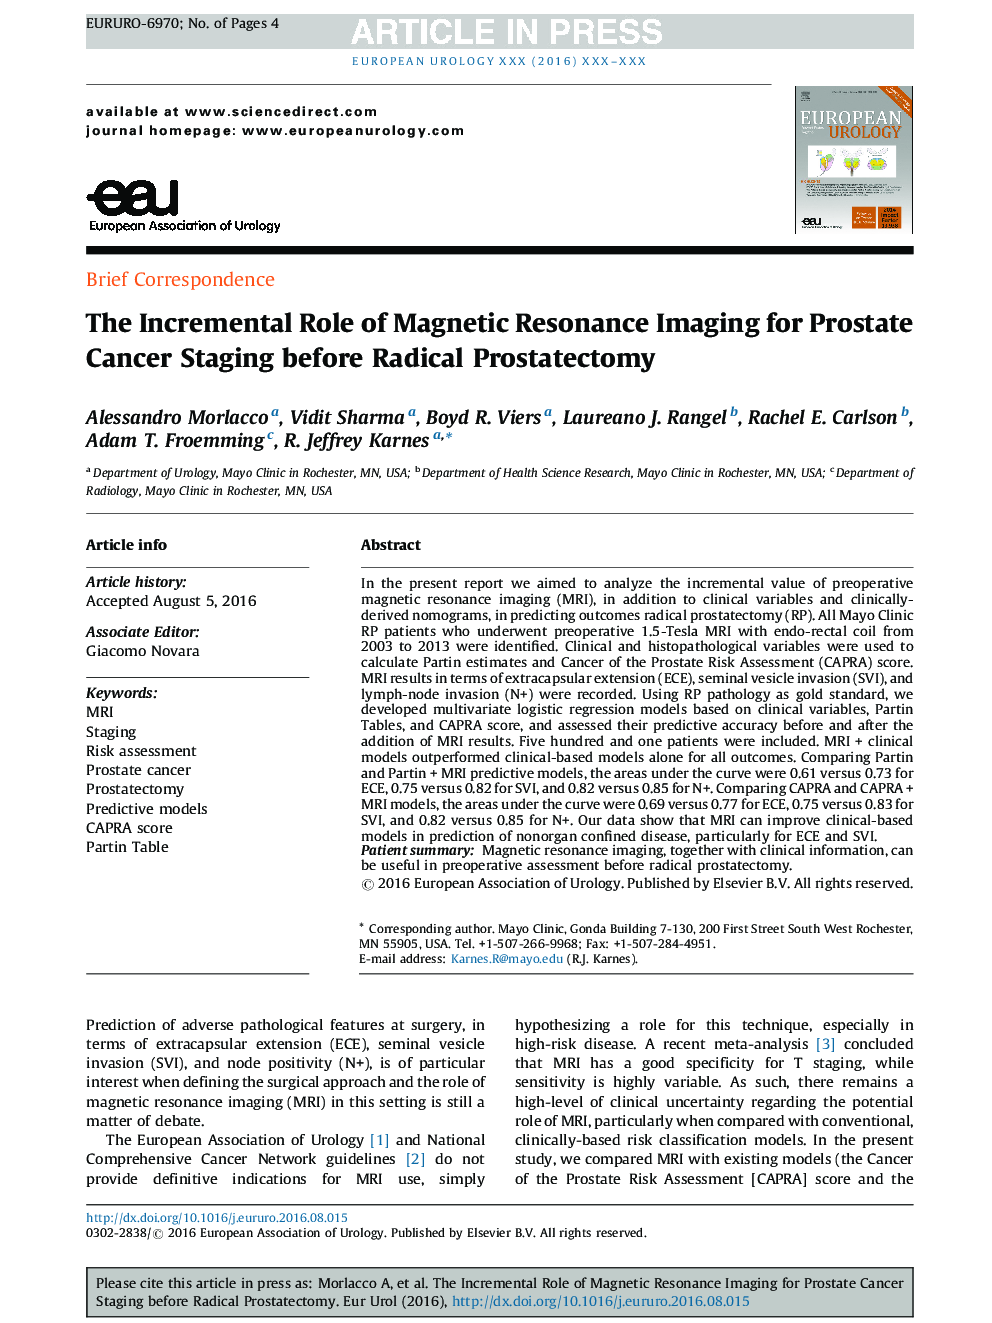 The Incremental Role of Magnetic Resonance Imaging for Prostate Cancer Staging before Radical Prostatectomy